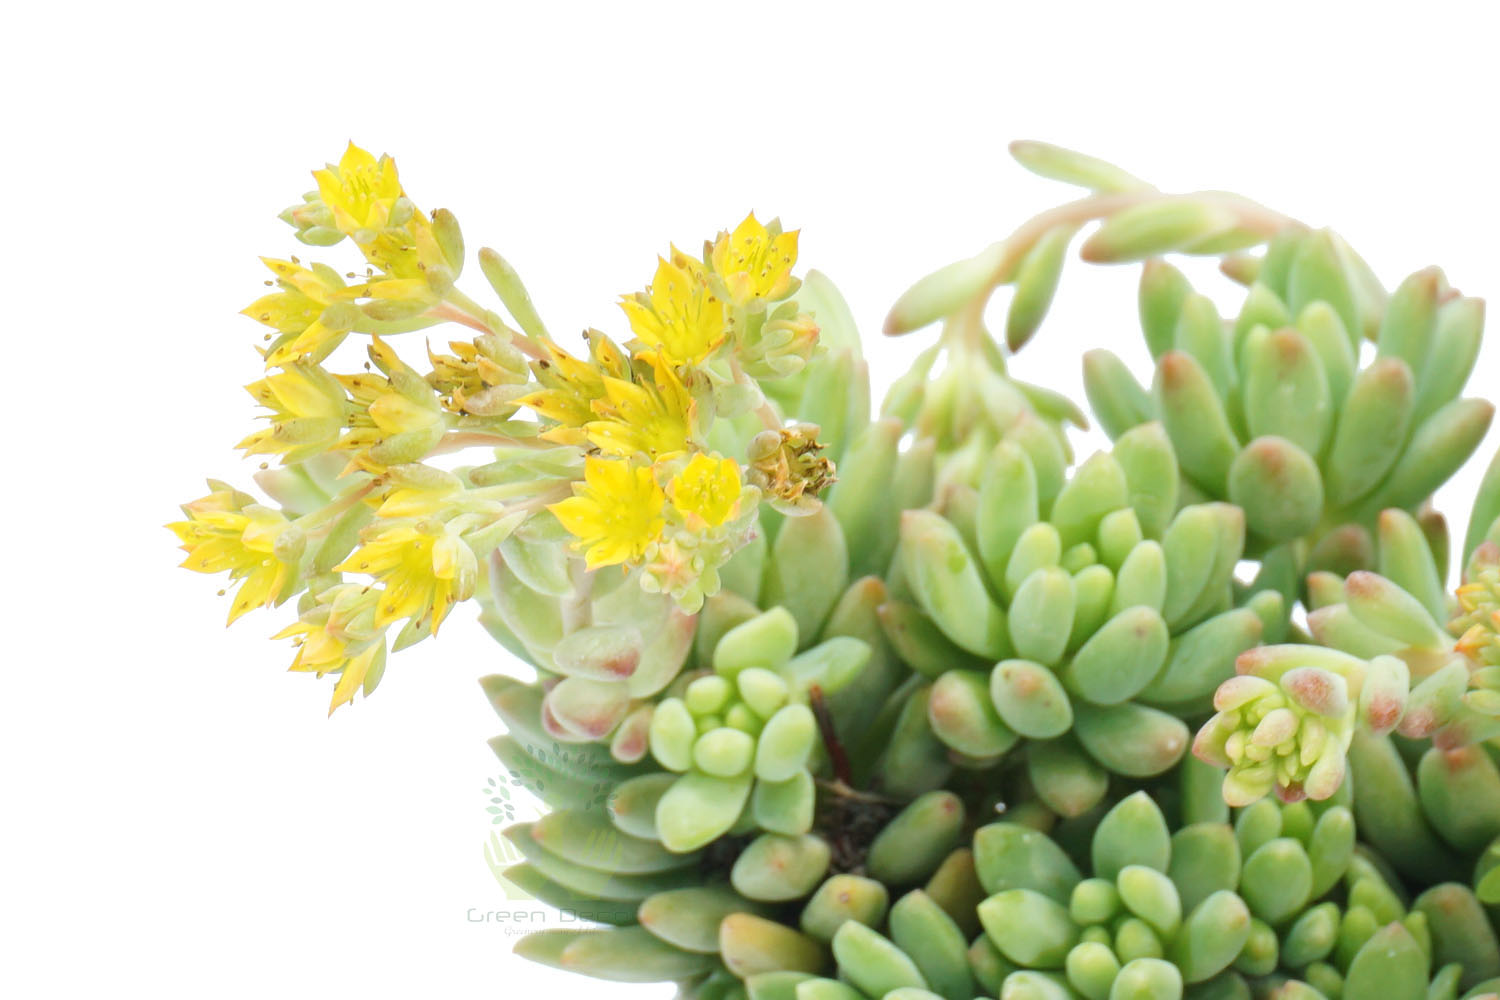 Buy Sedum Angelina Plants , White Pots and seeds in Delhi NCR by the best online nursery shop Greendecor.